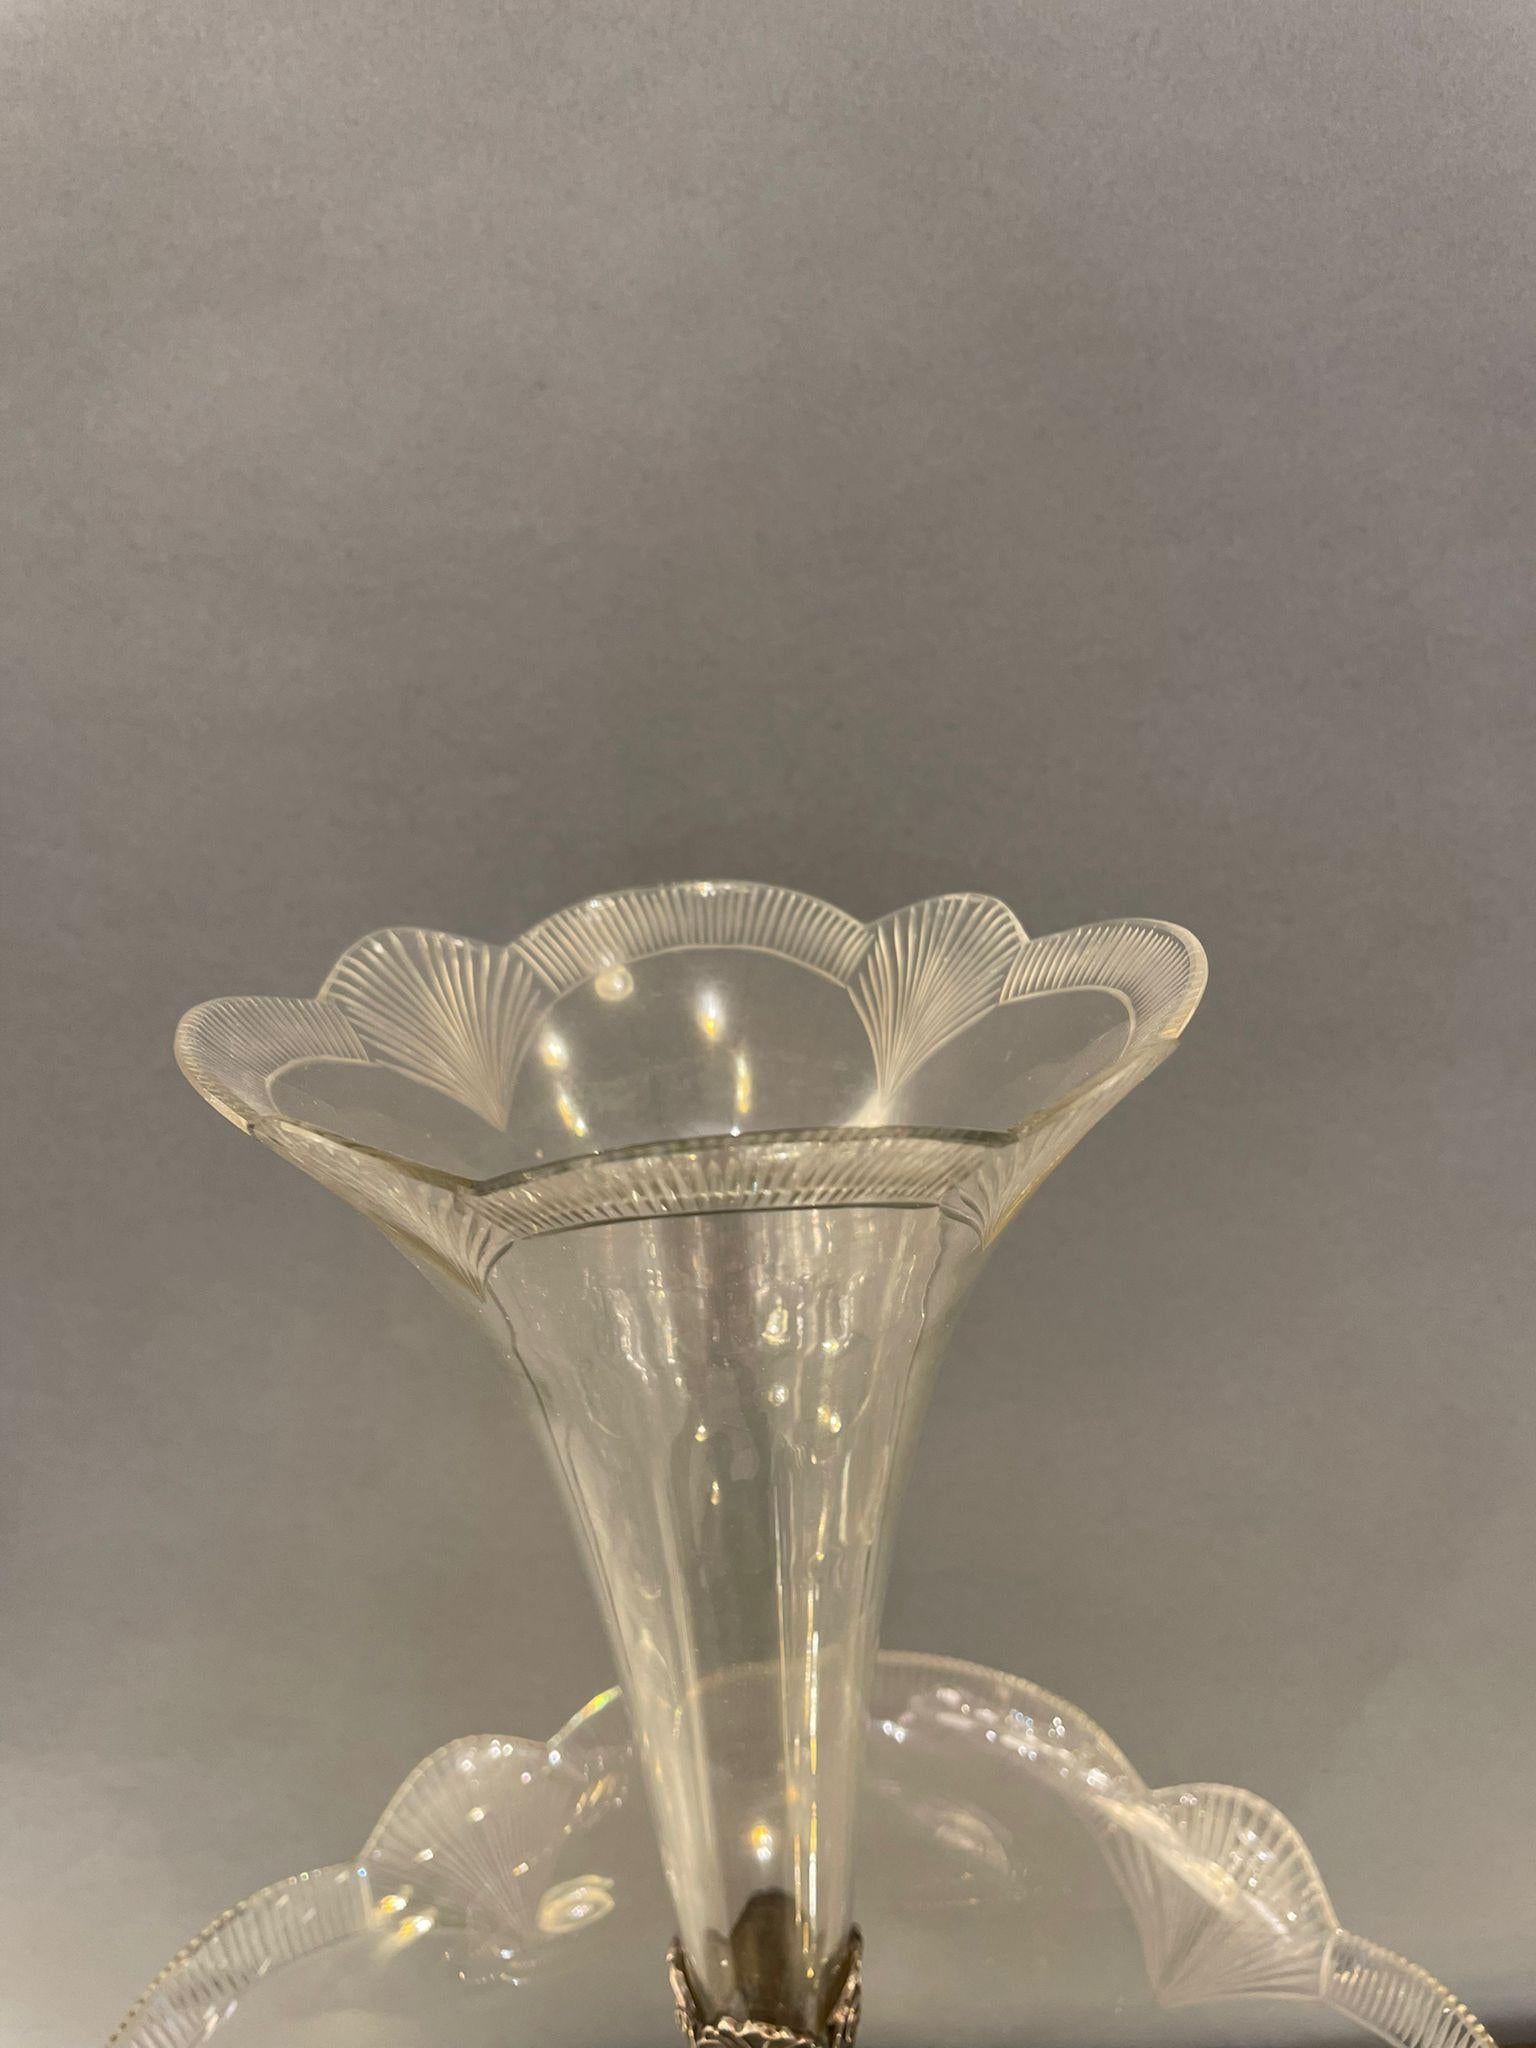 Outstanding Art Nouveau 19th Century Epergne/Centrepiece For Sale 1